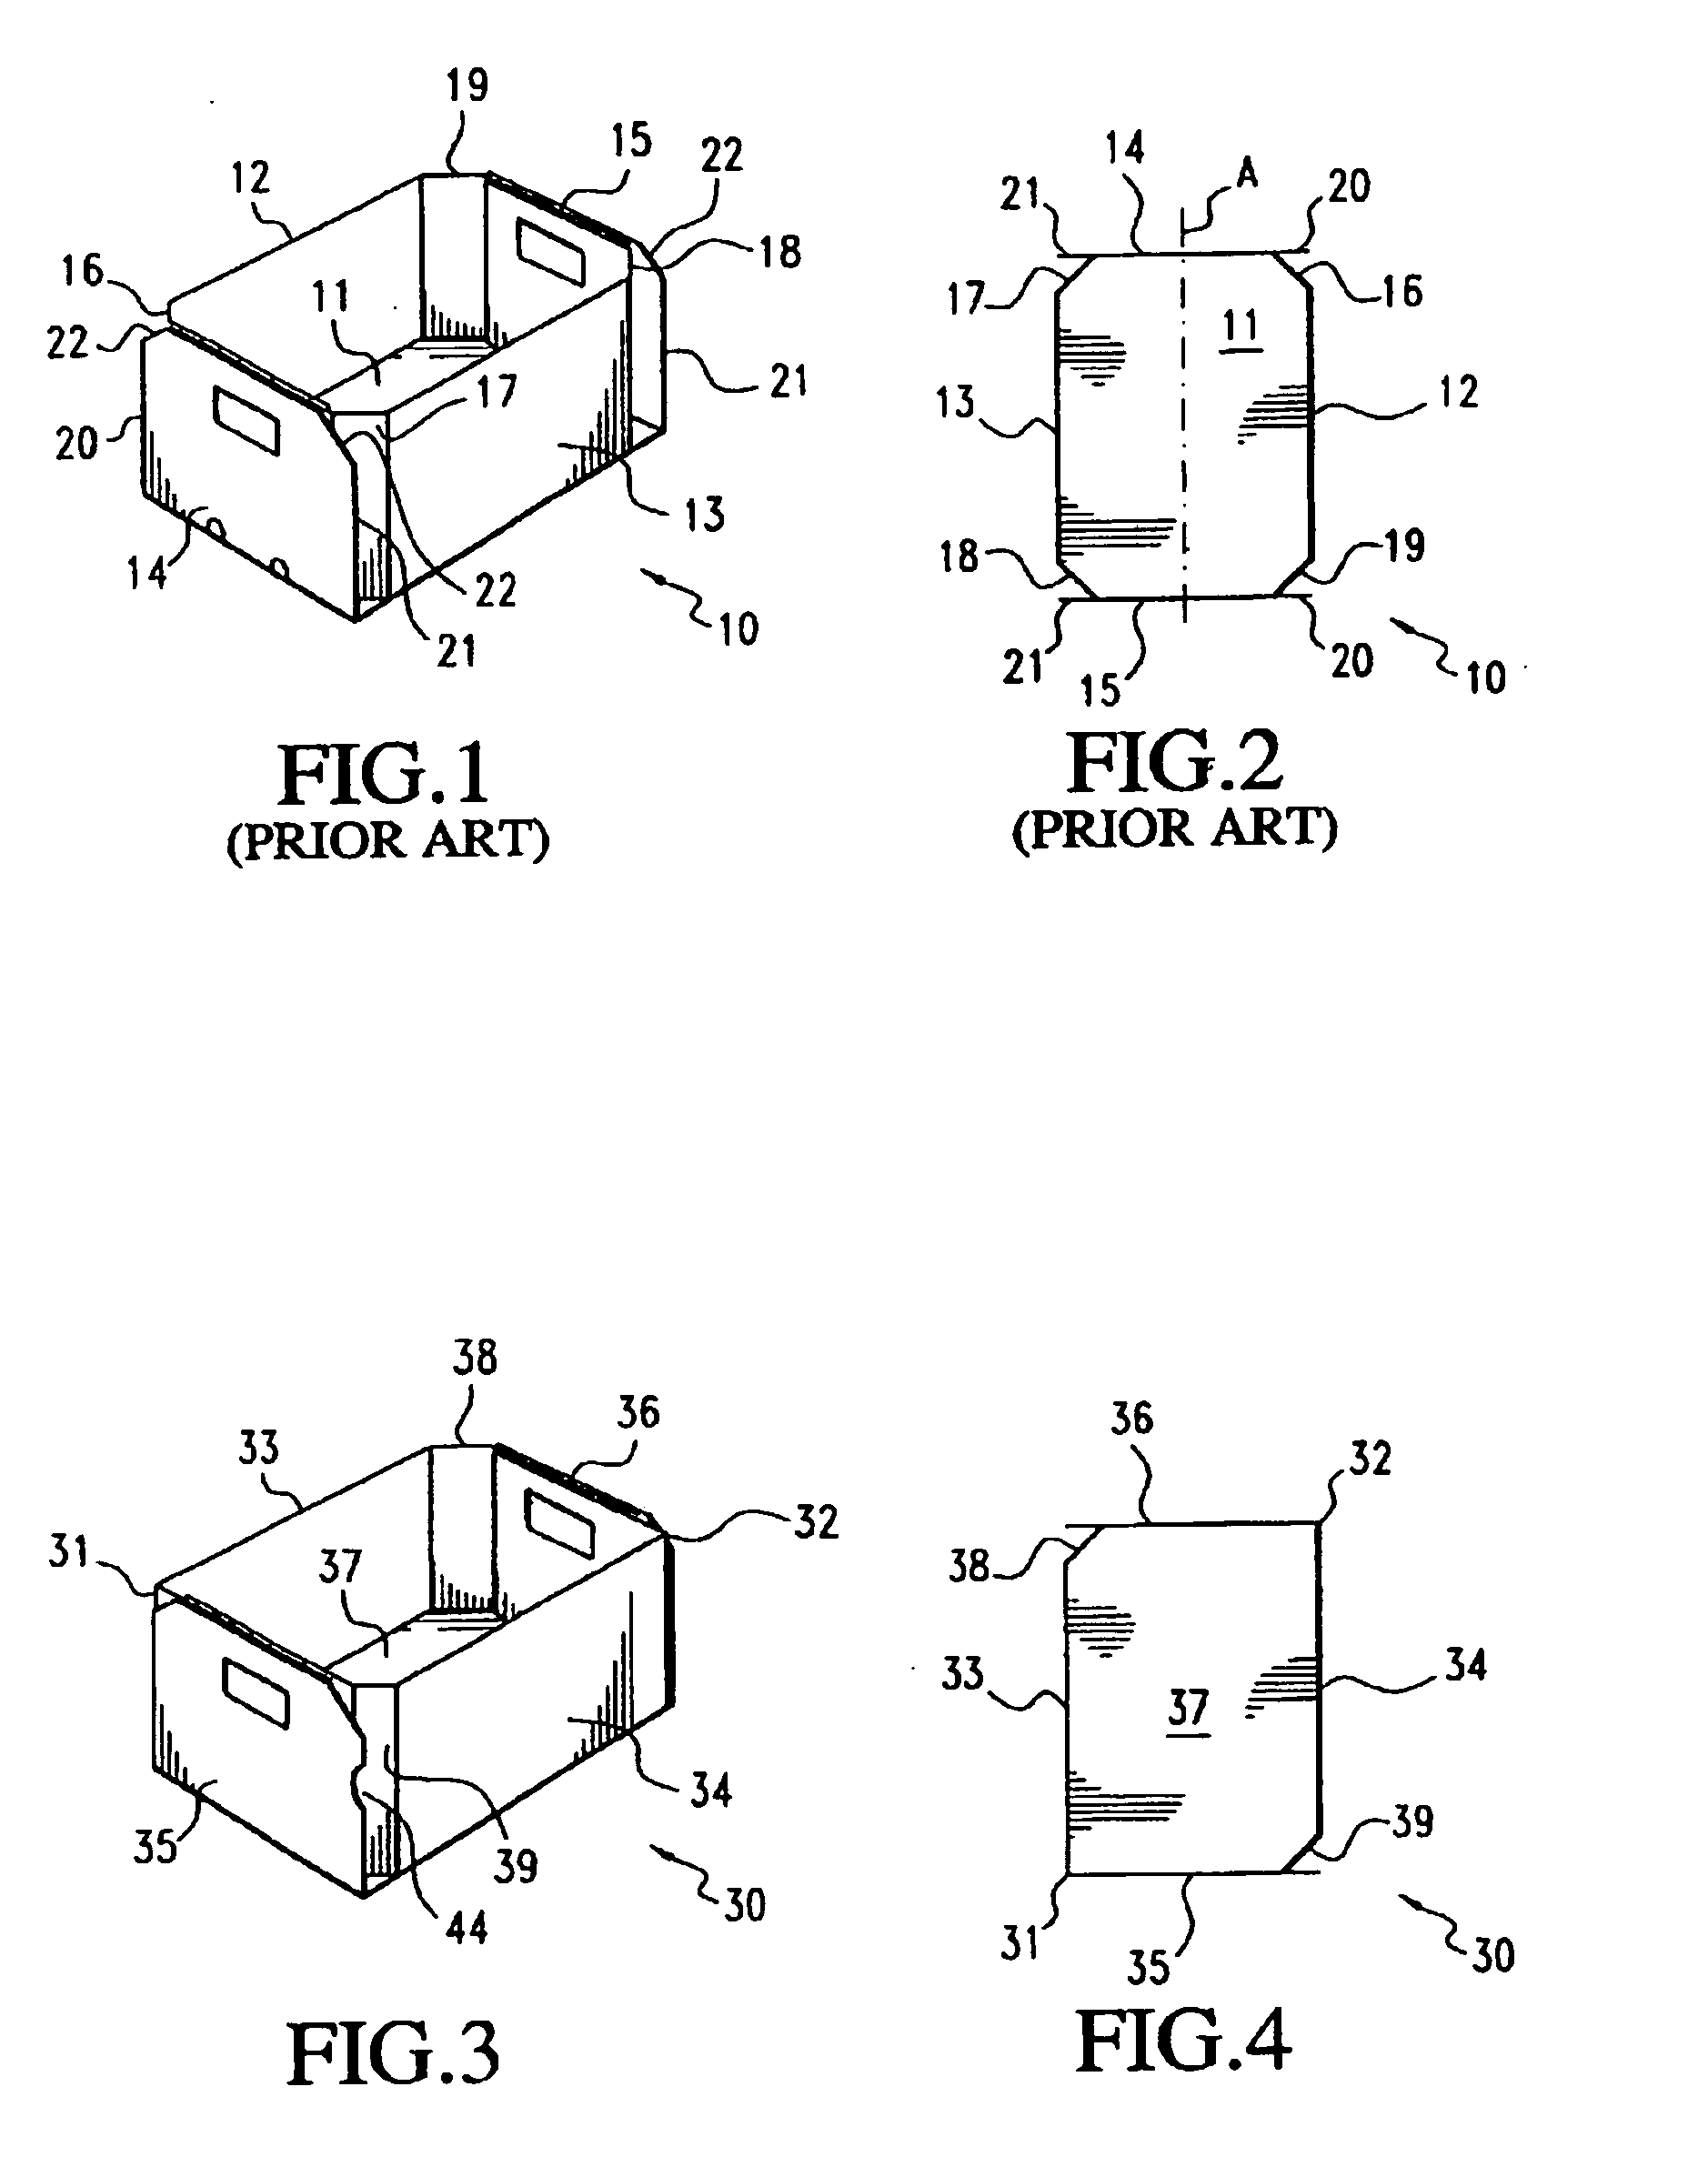 Container with improved stacking strength and resistance to lateral distortion